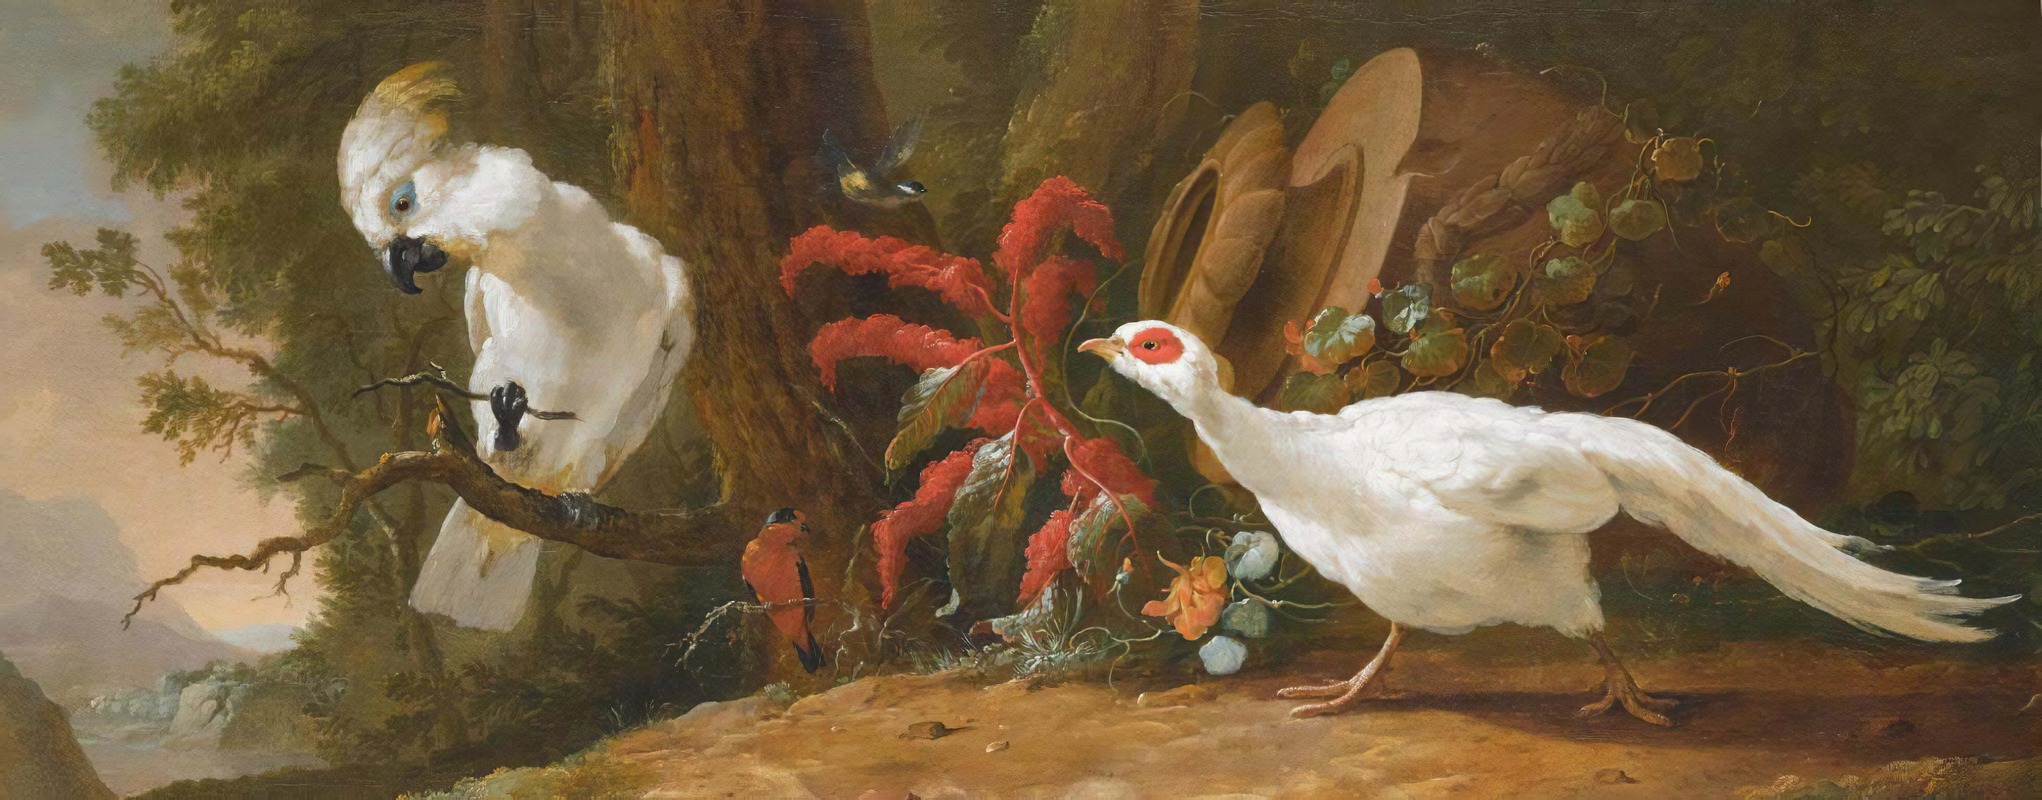 Abraham Bisschop - A Sulphur-Crested Cockatoo, A Red-Crested Cardinal And A White Pheasant In A Landscape With A Fallen Urn In The Background